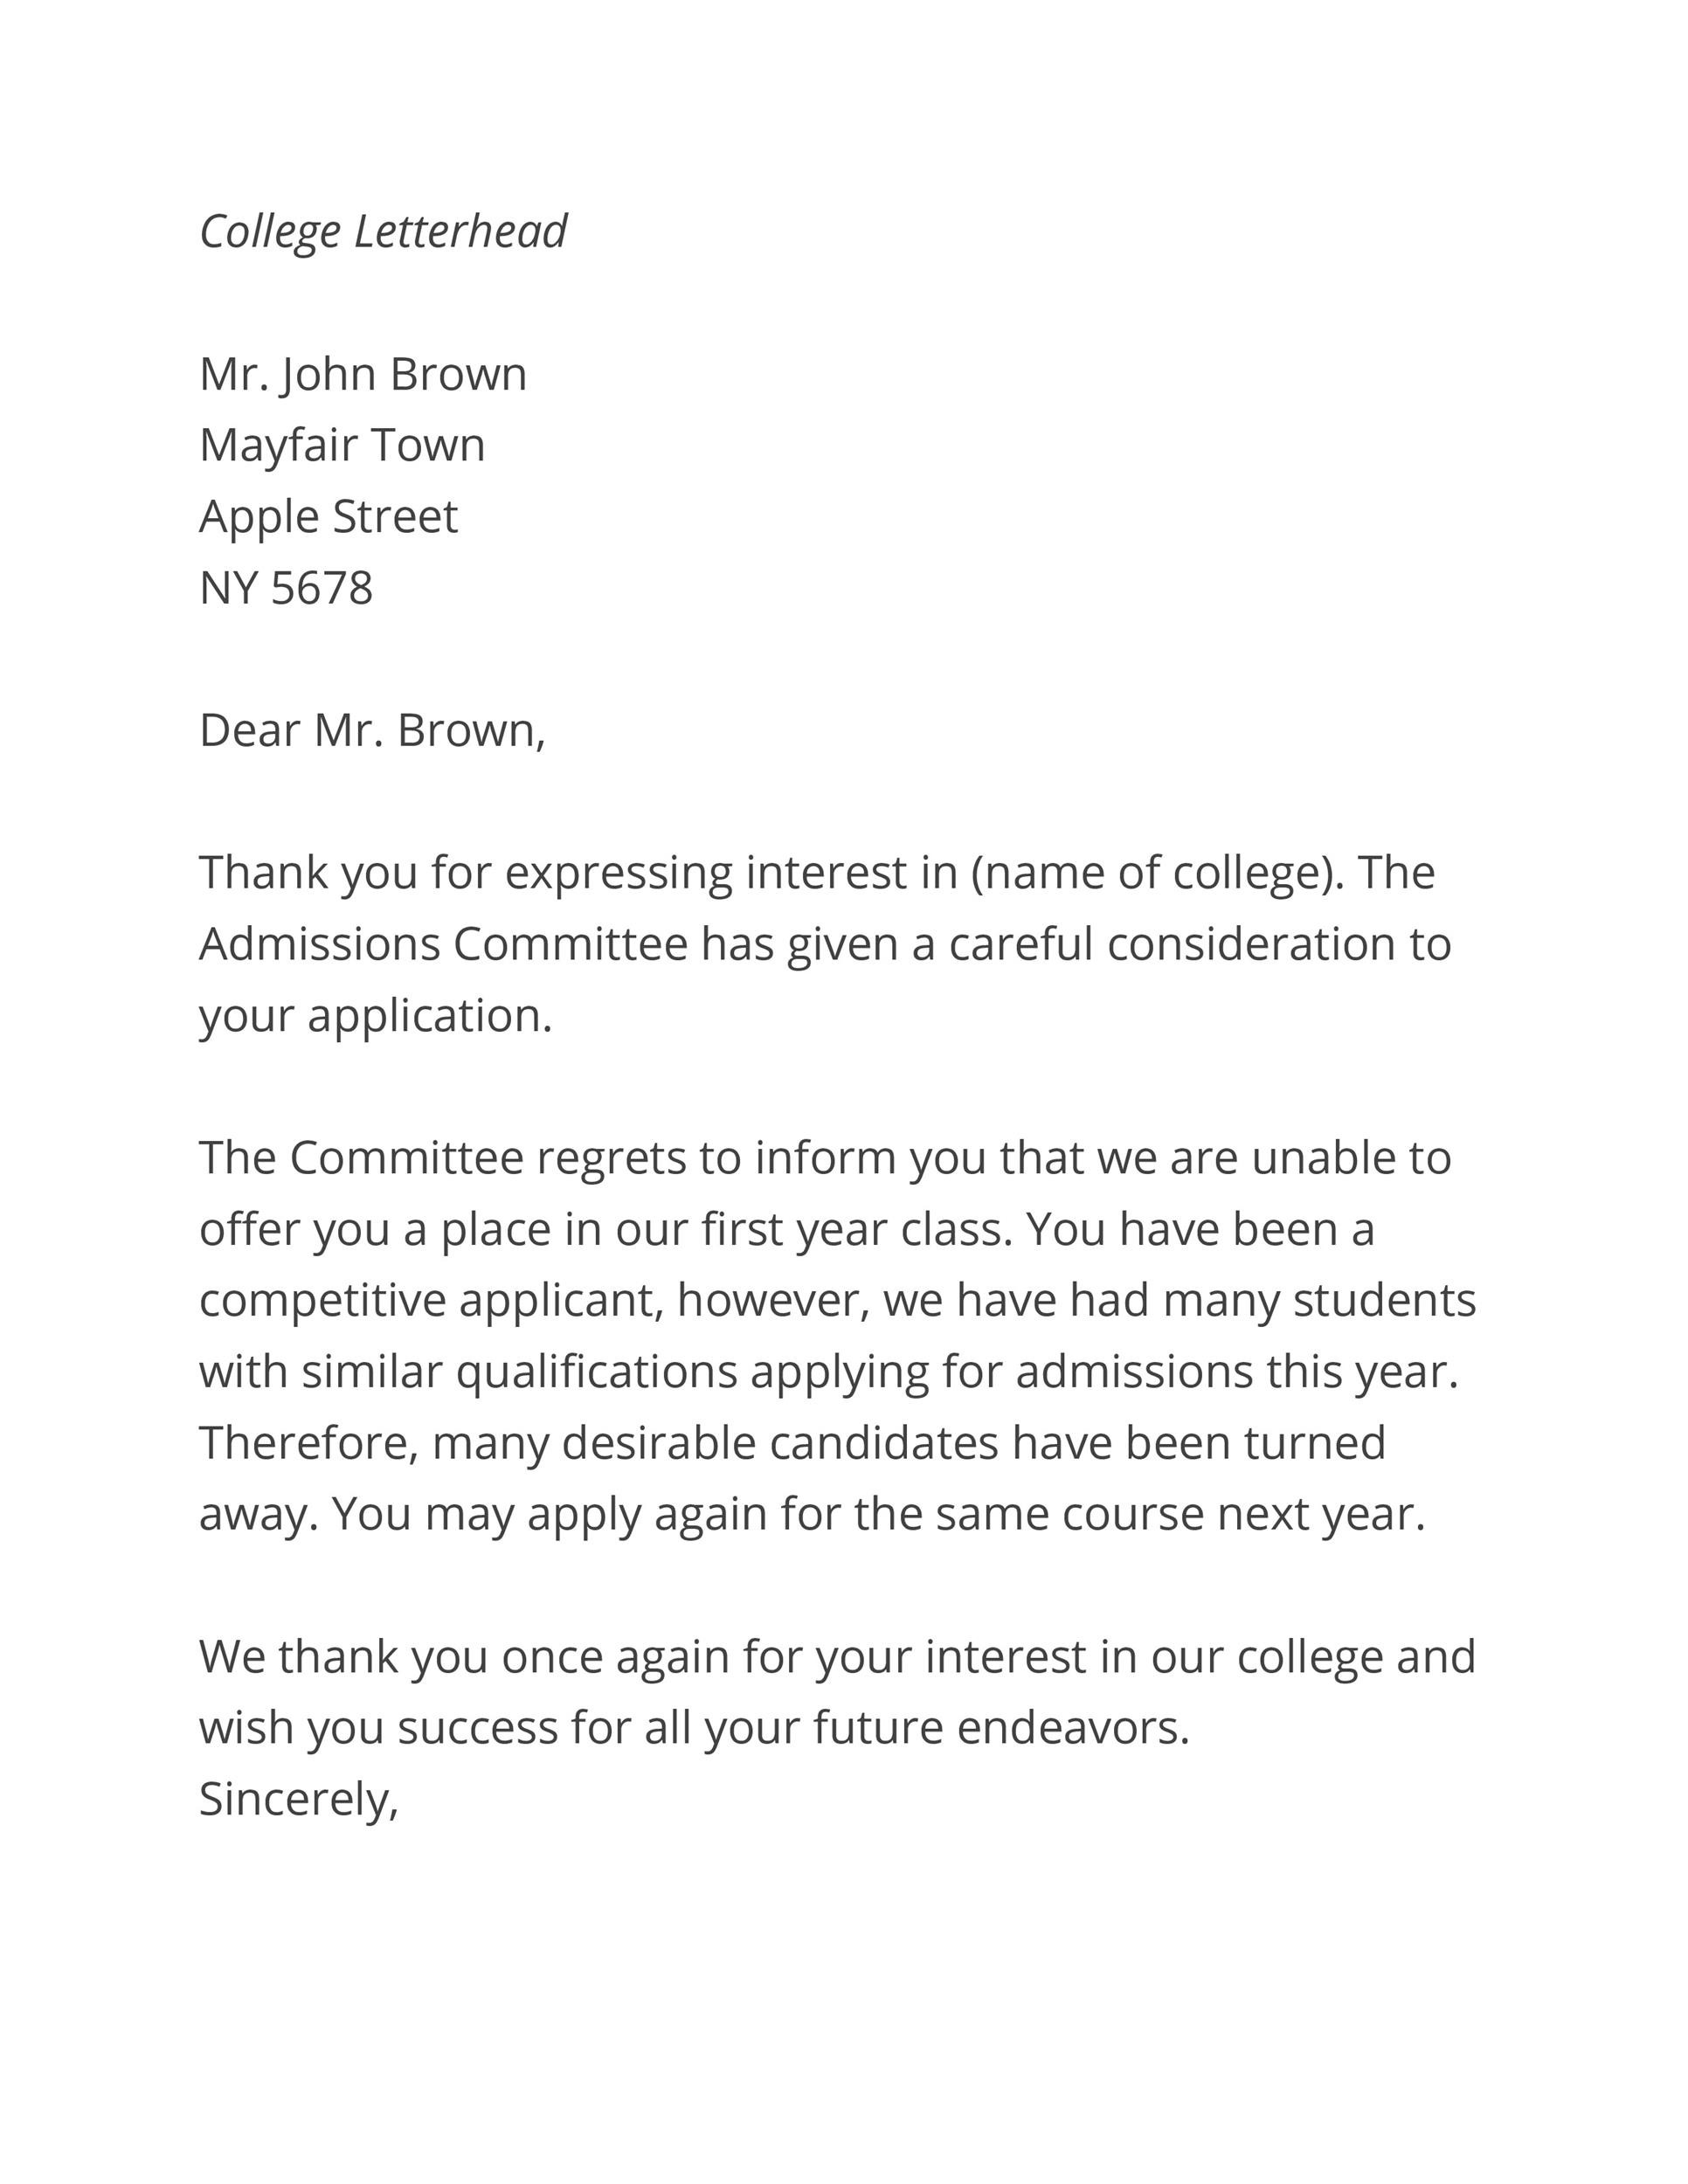 College Rejection Appeal Letter Sample from templatelab.com